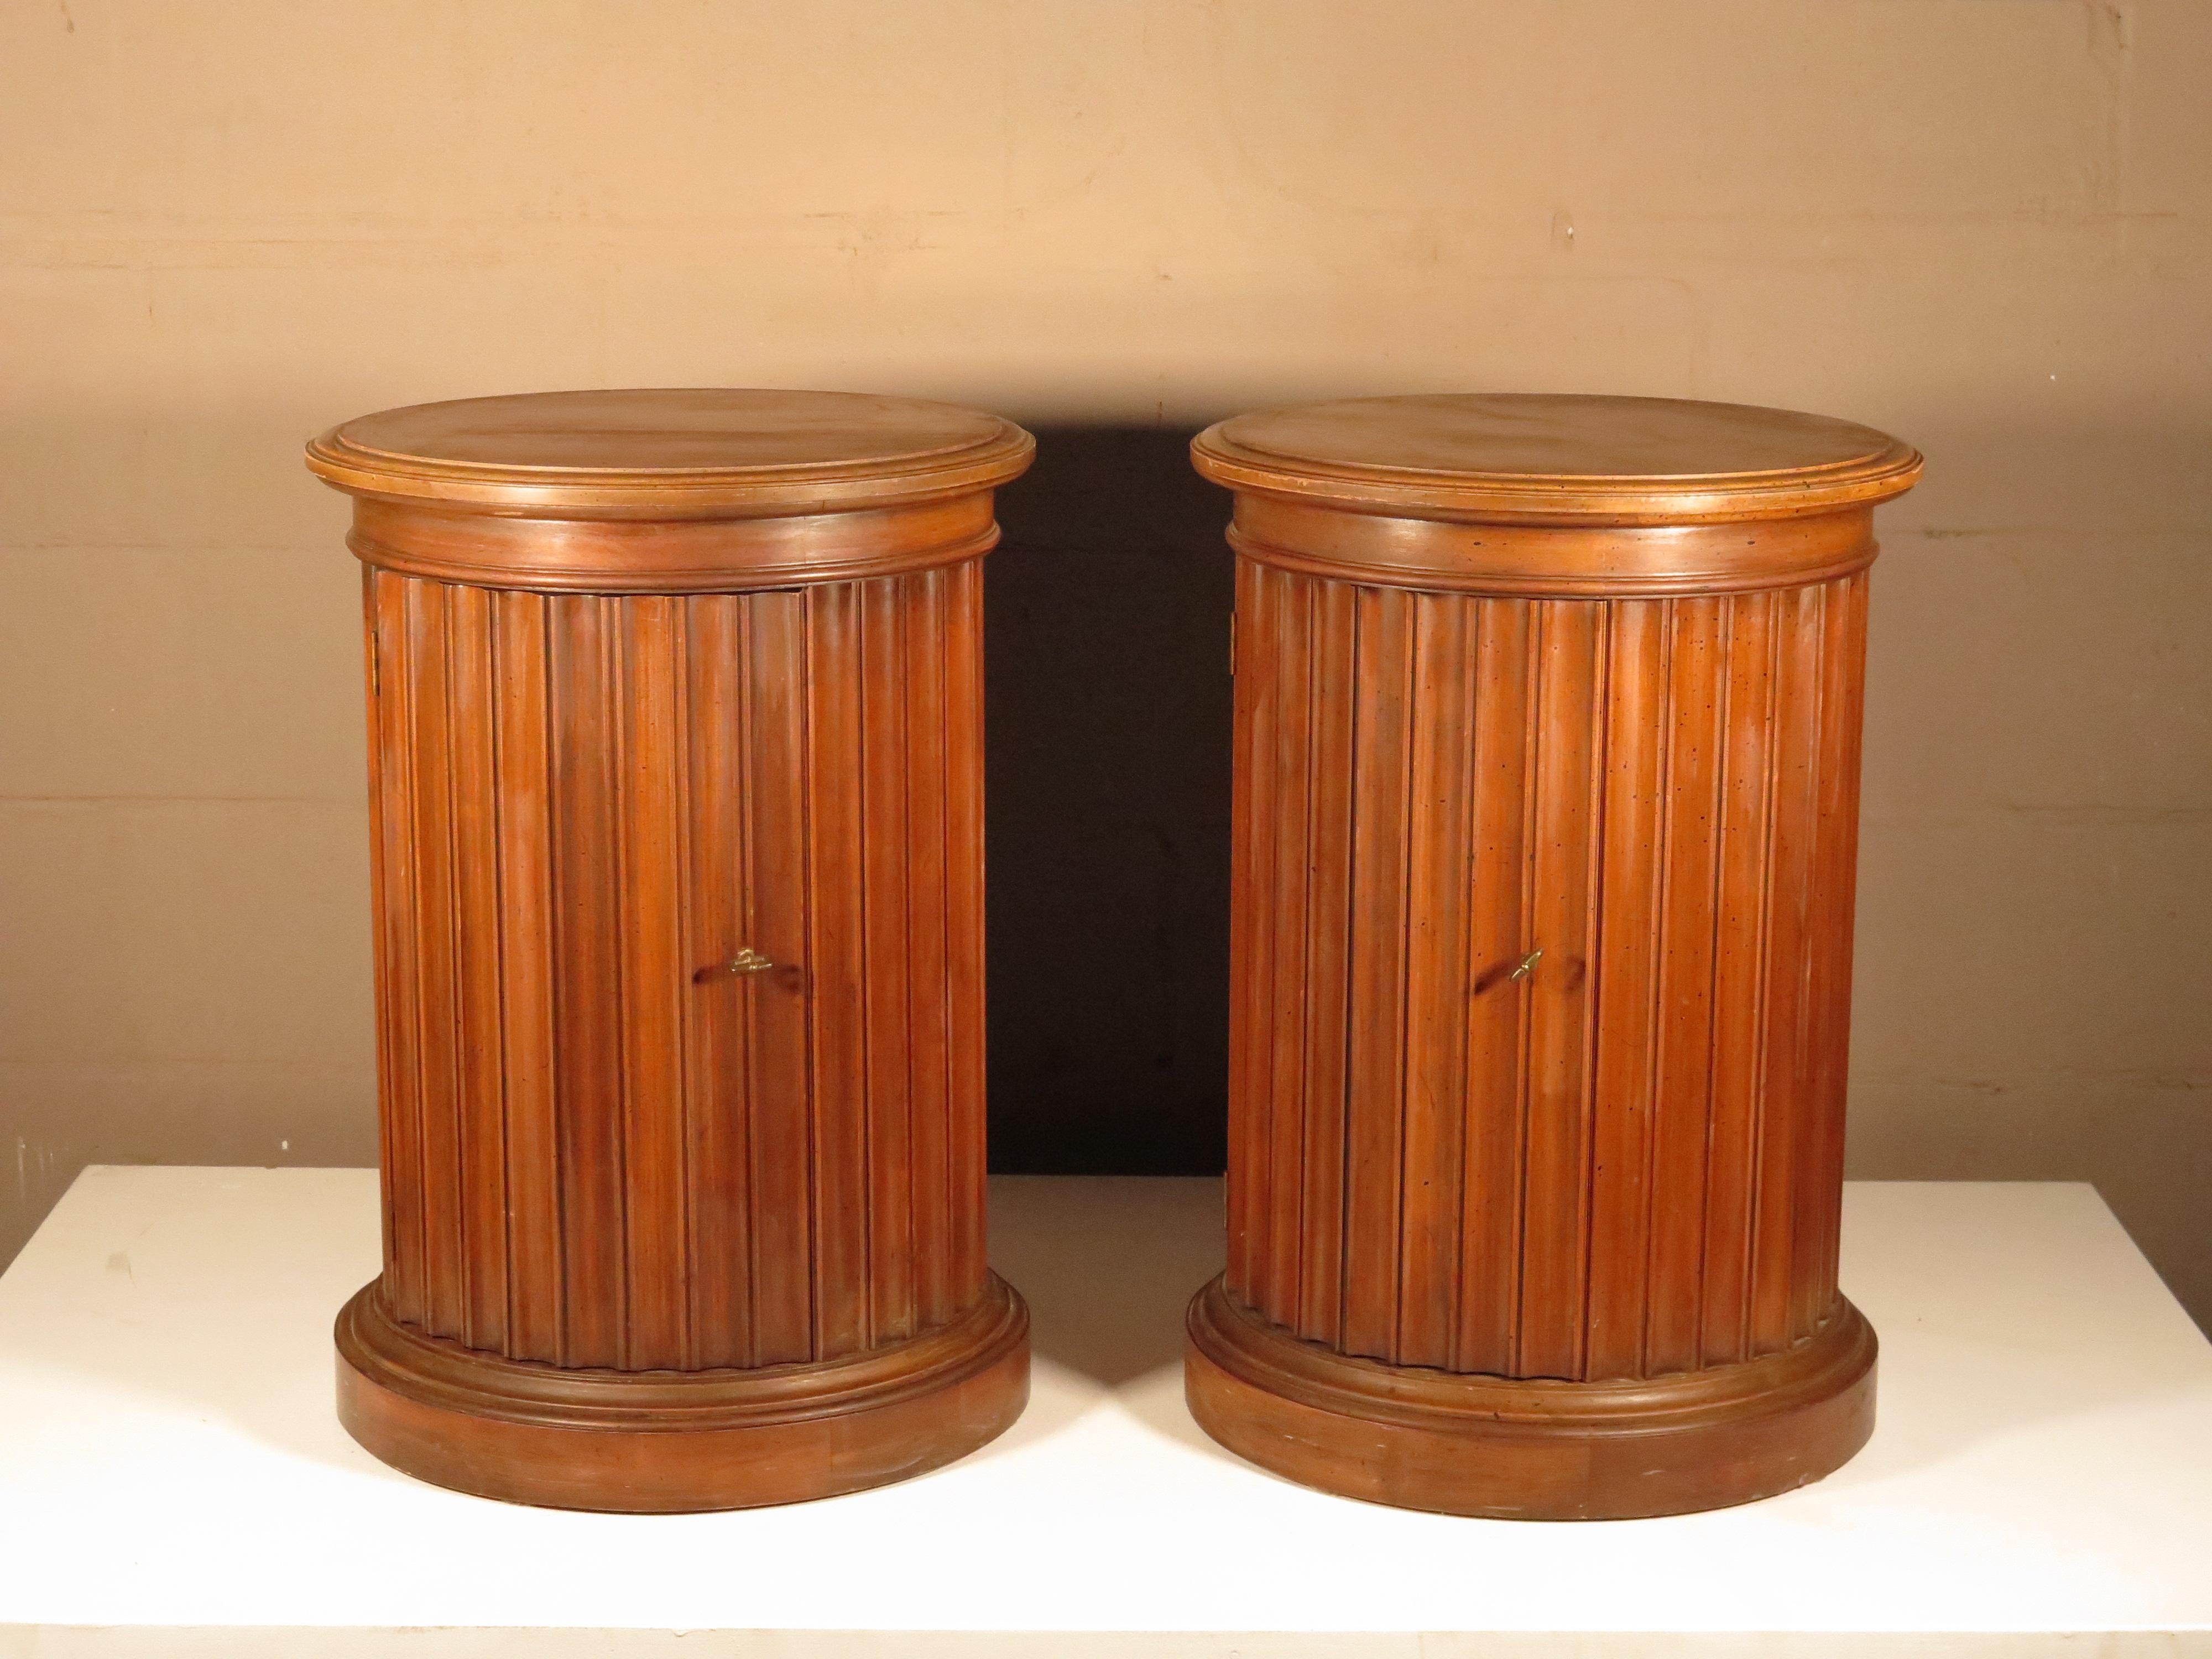 A pair of burl wood pedestals with original speckled finish. Brass key as handles (no locks) open inside for storage. Made by Brandt Co. of Maryland circa 1970. Measuring 25